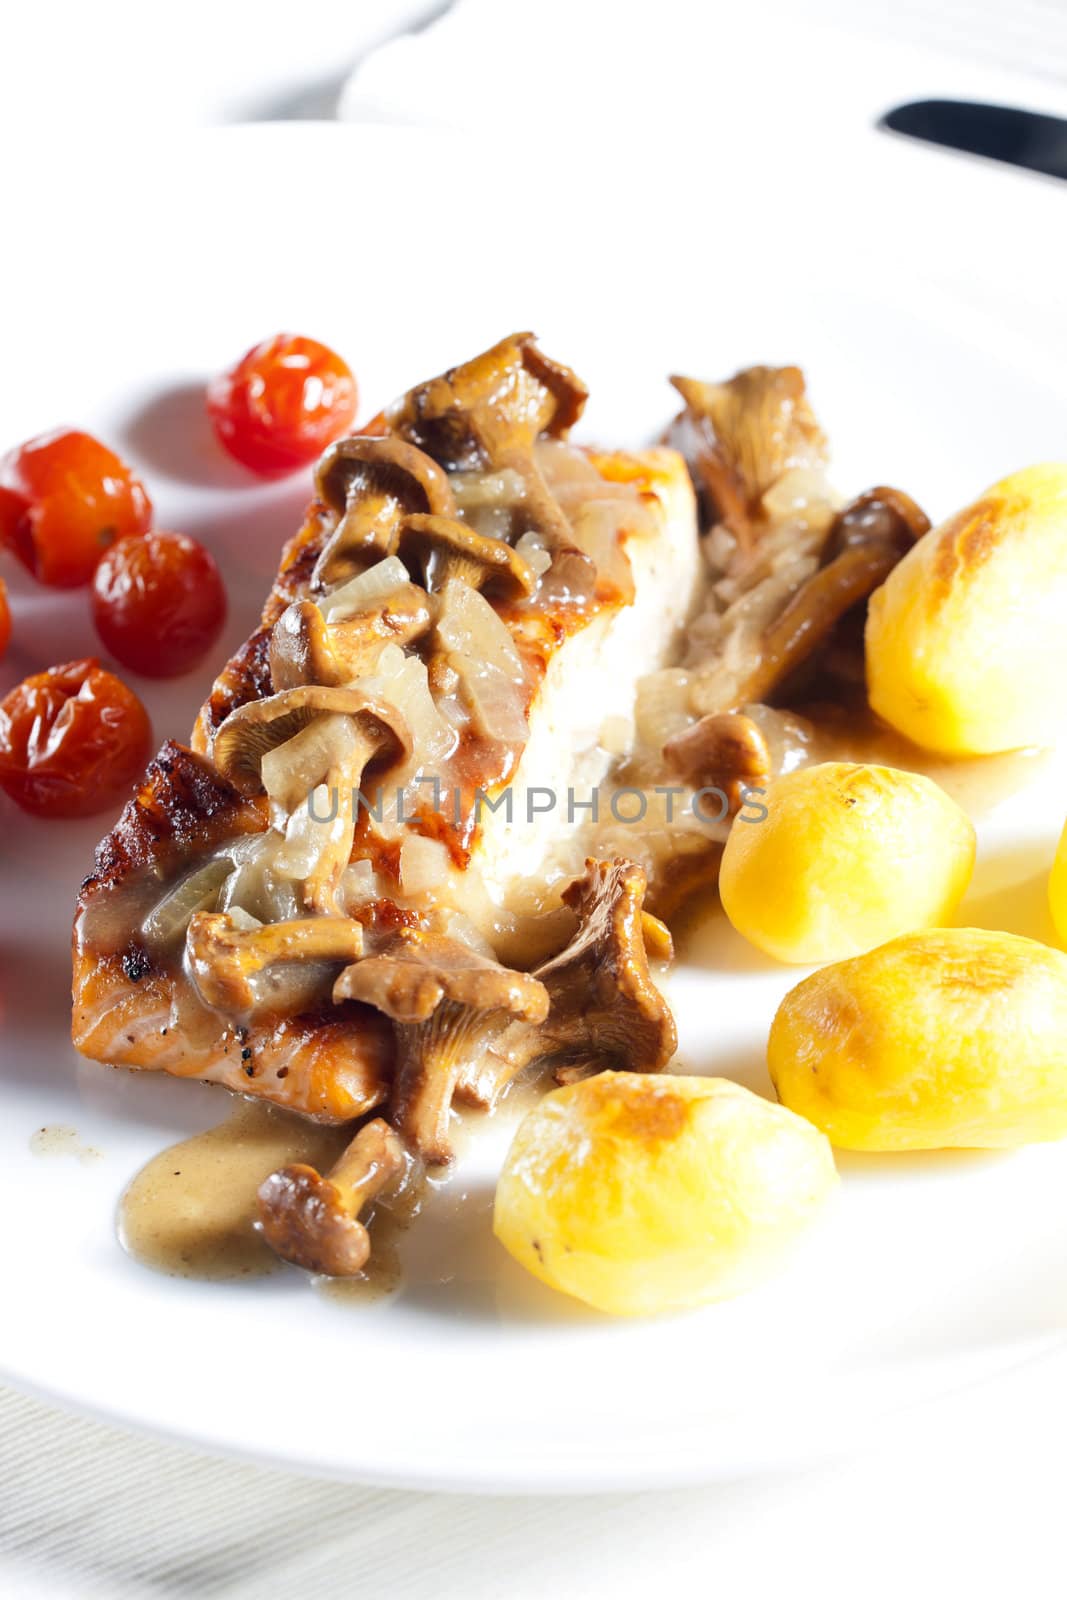 grilled salmon with mushrooms and cherry tomatoes by phbcz